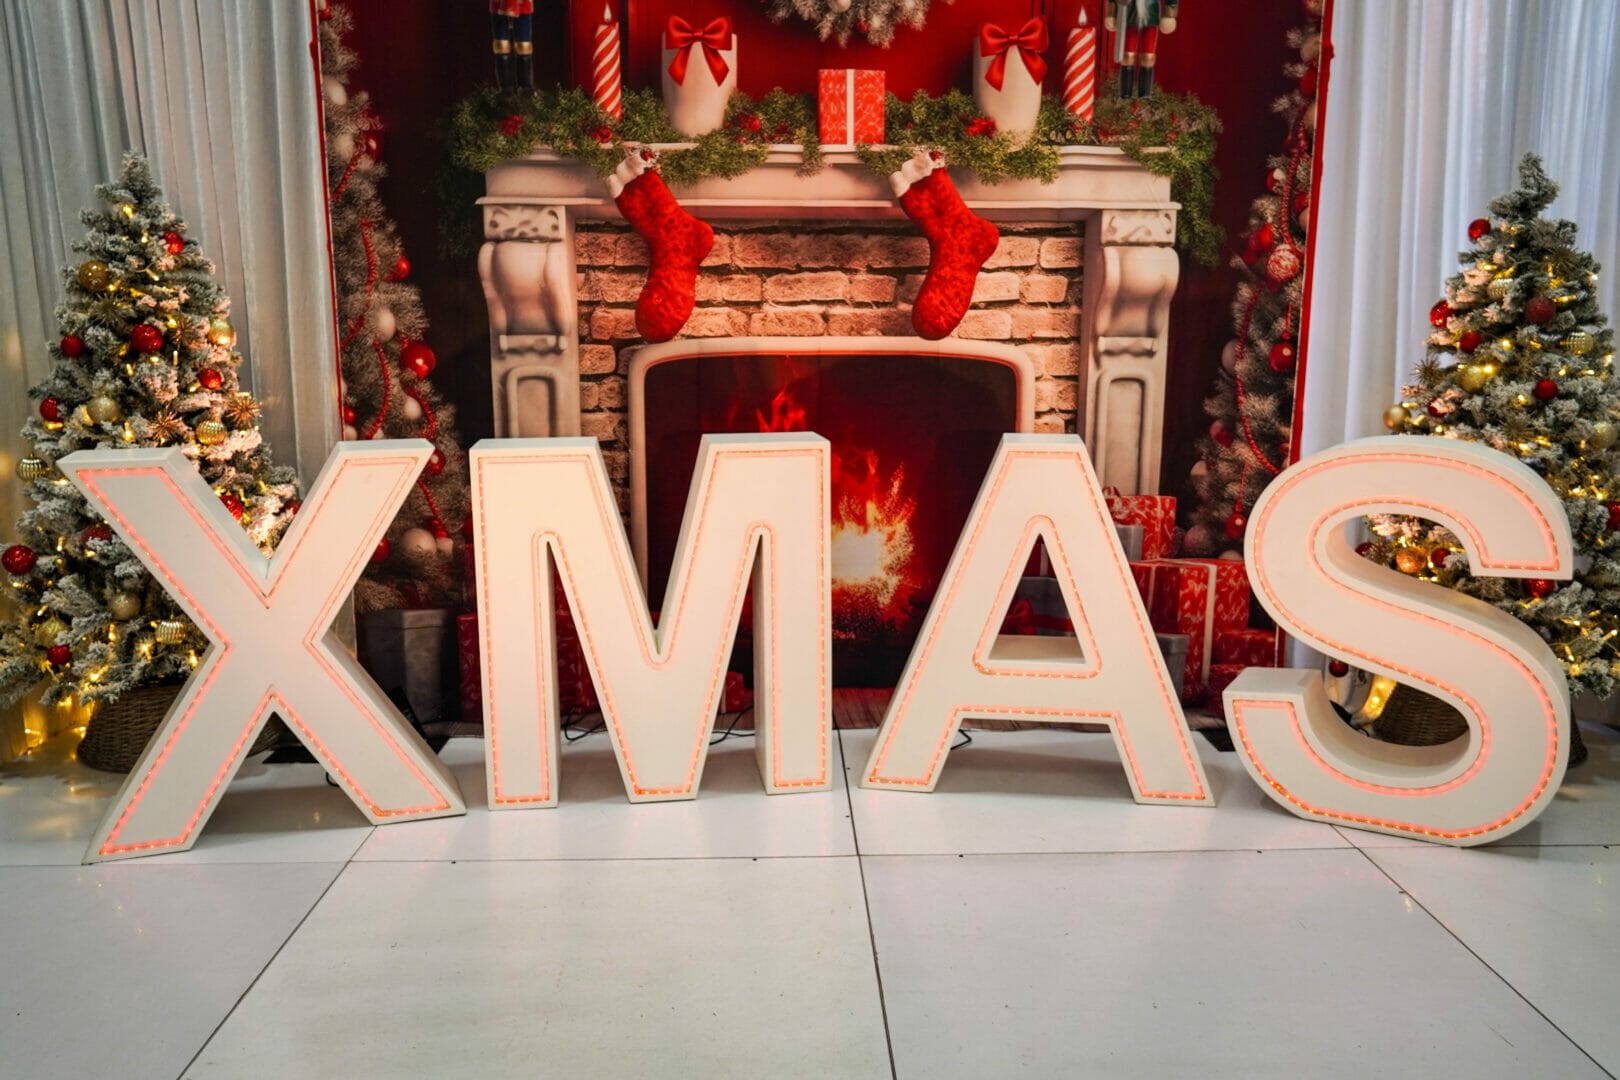 christmas themed backdrop and large light up letters spelling out XMAS